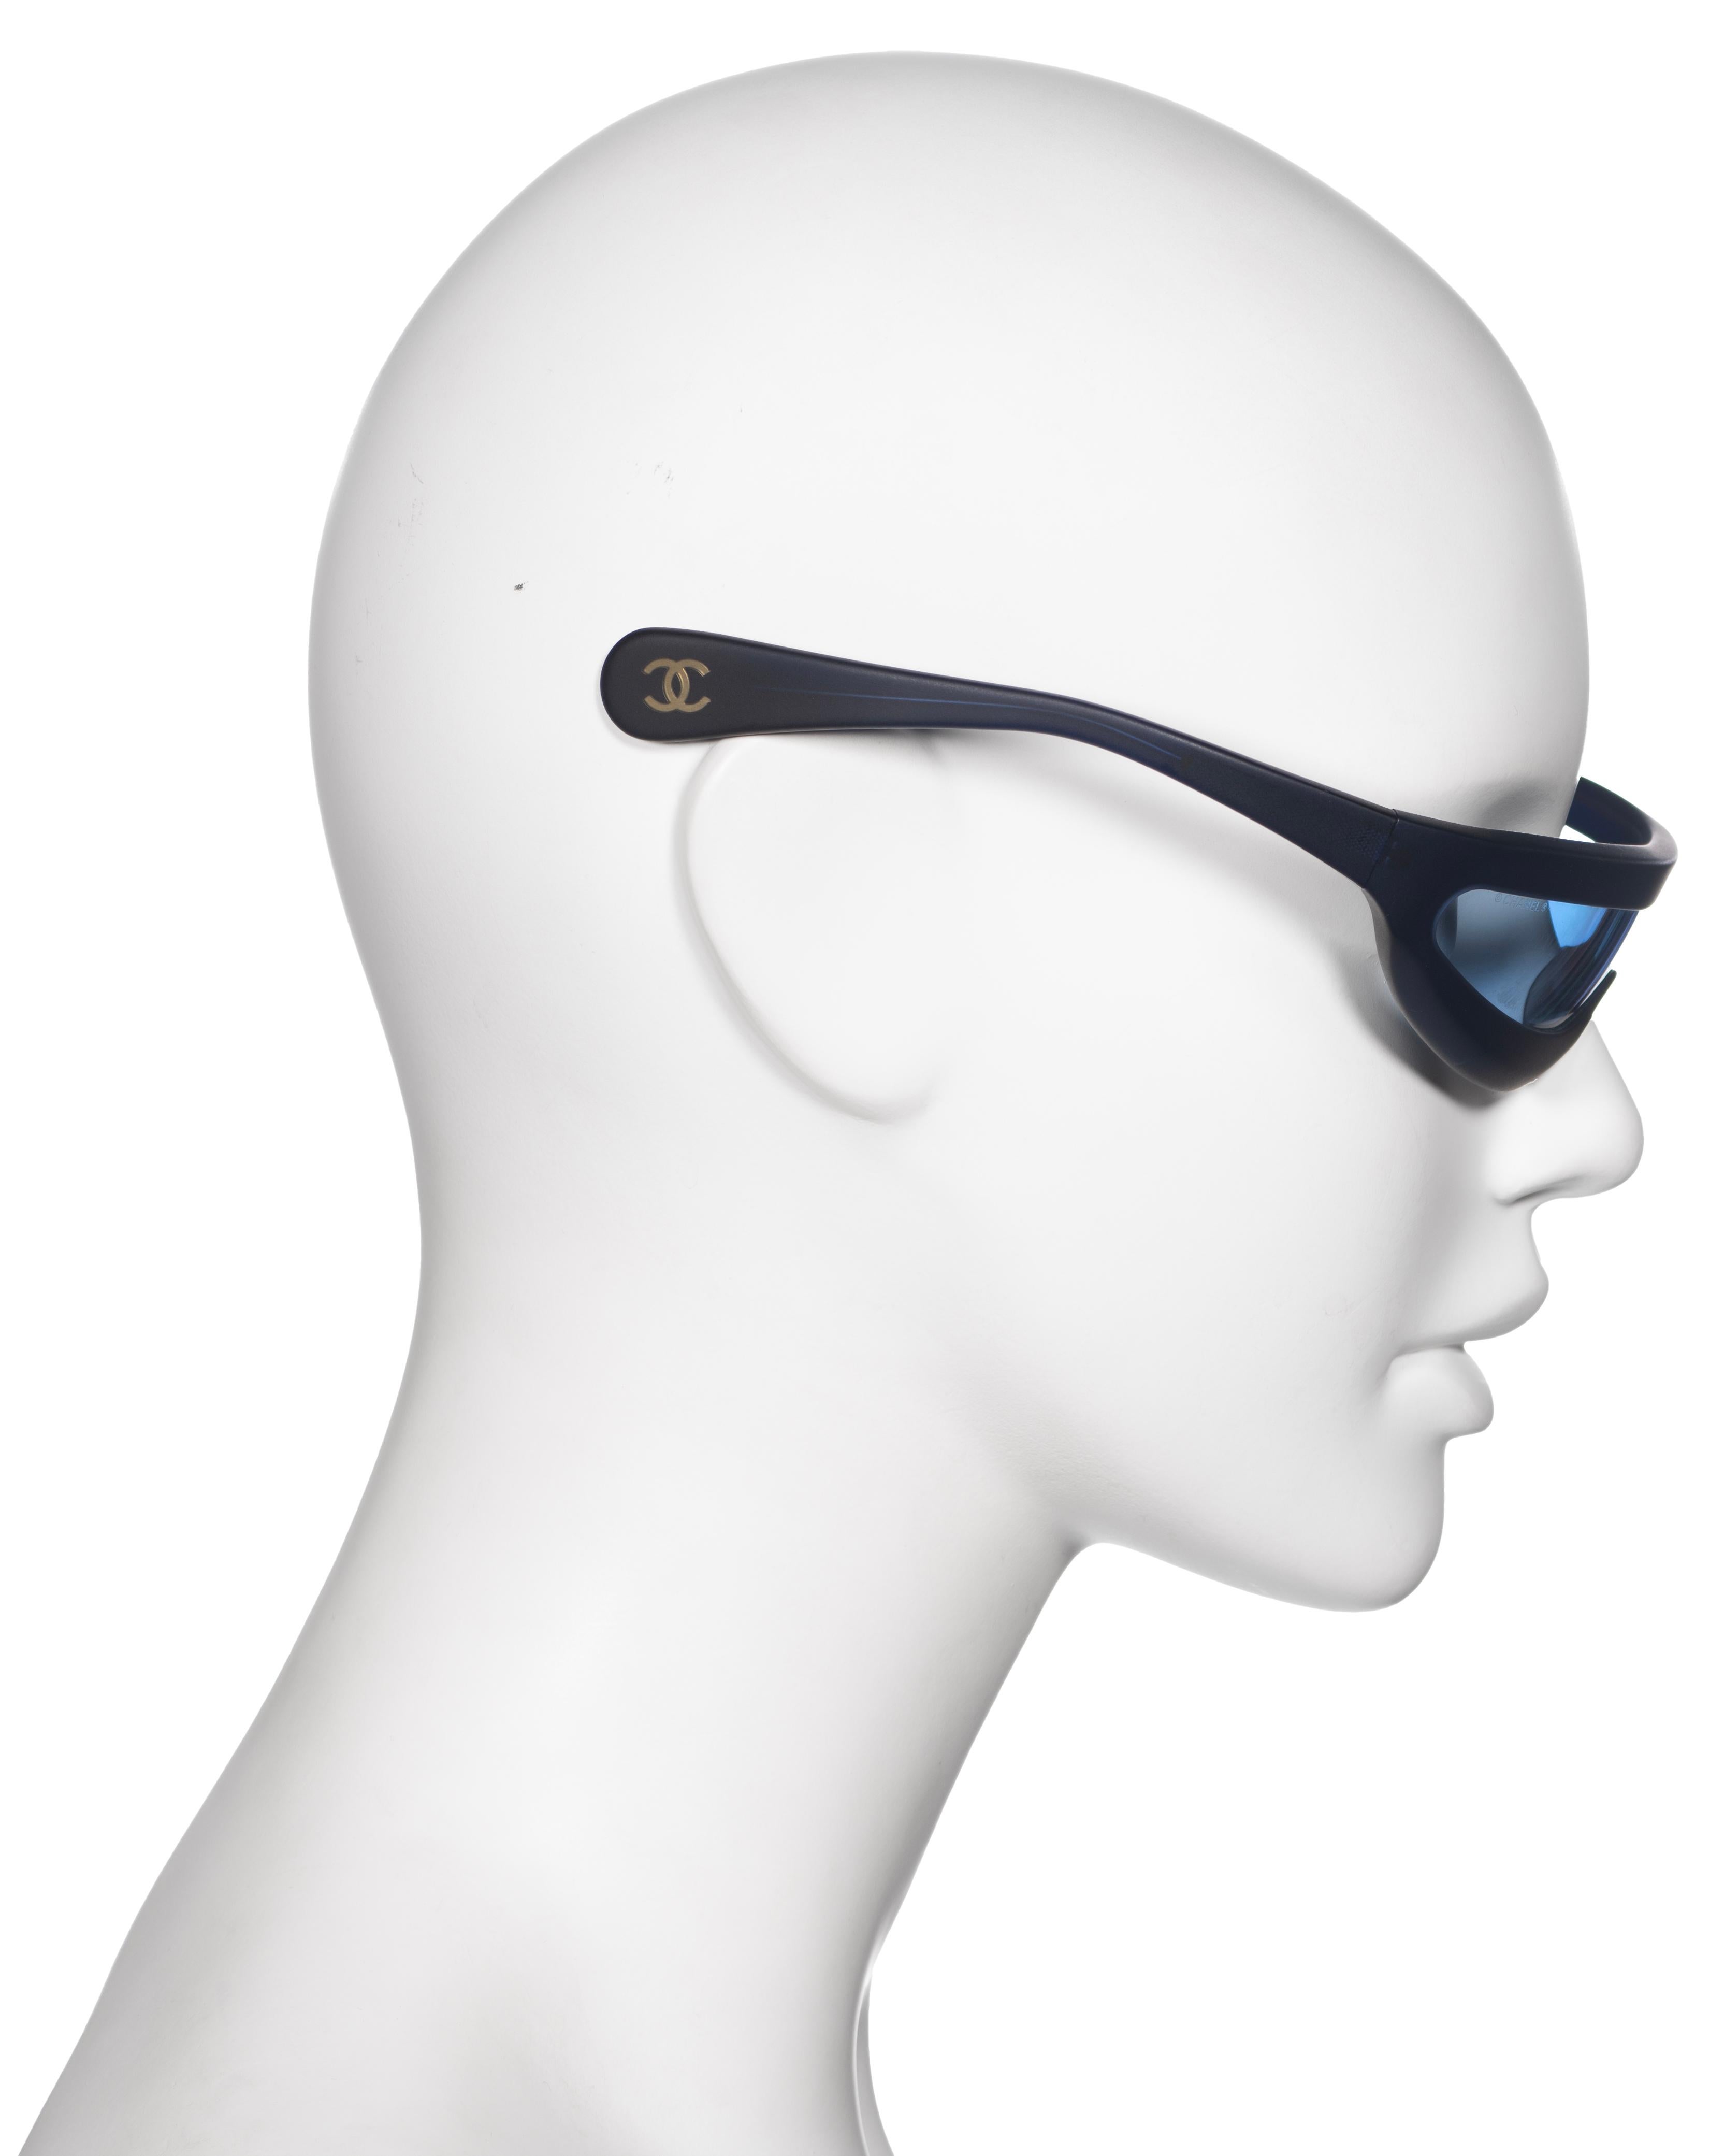 Chanel by Karl Lagerfeld Blue Monolens Sunglasses, ss 2001 3